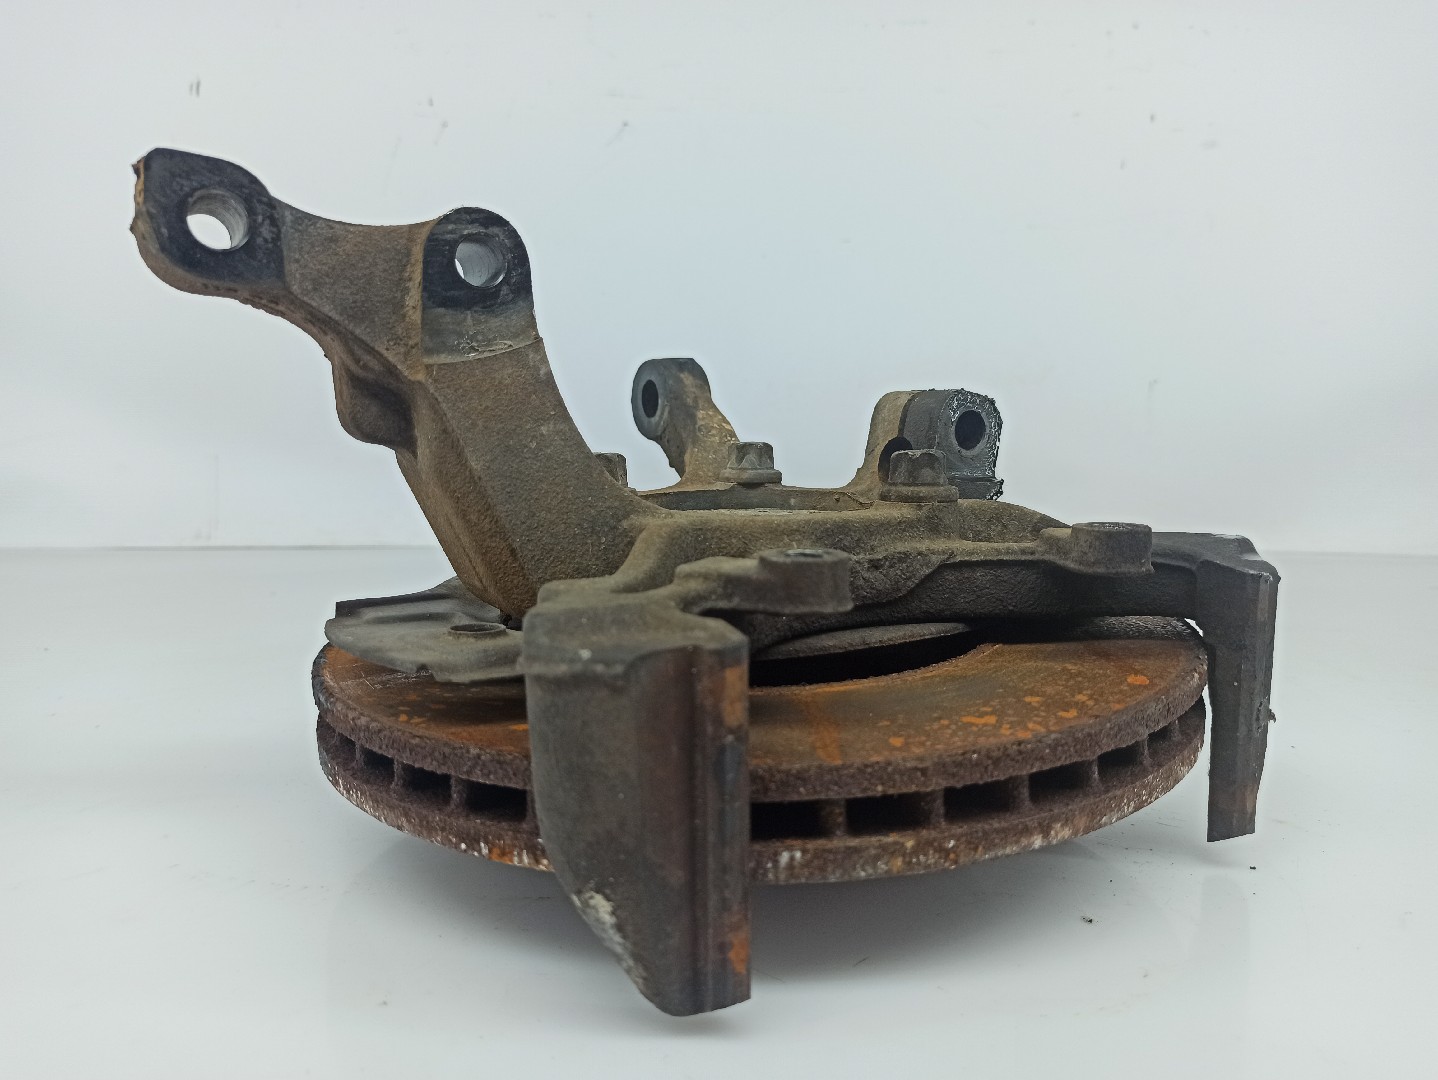 Used Auto Parts for OPEL | Recife Used Car Parts